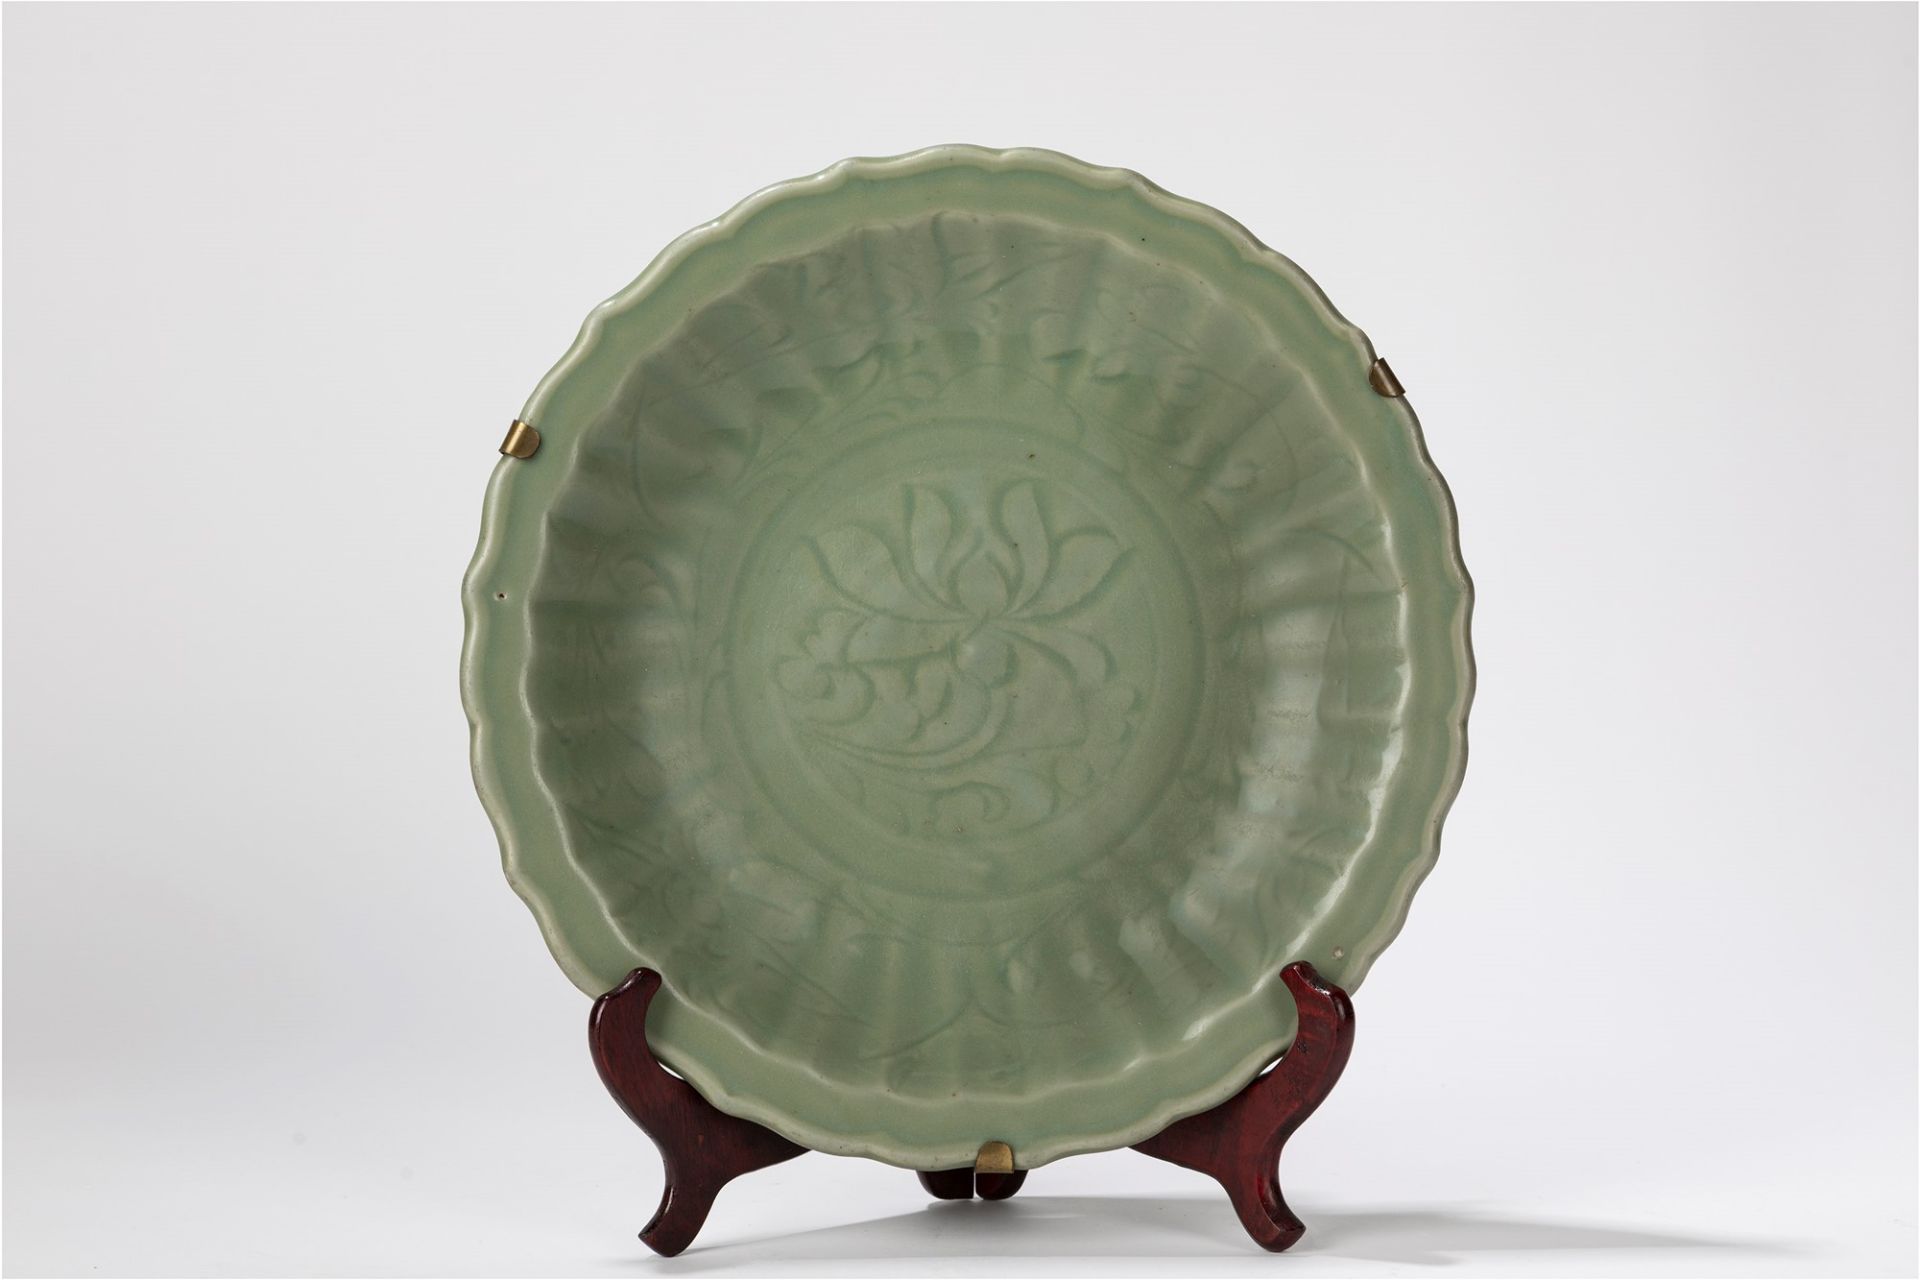 A celadon plate. China, Ming dynasty, 15th c.